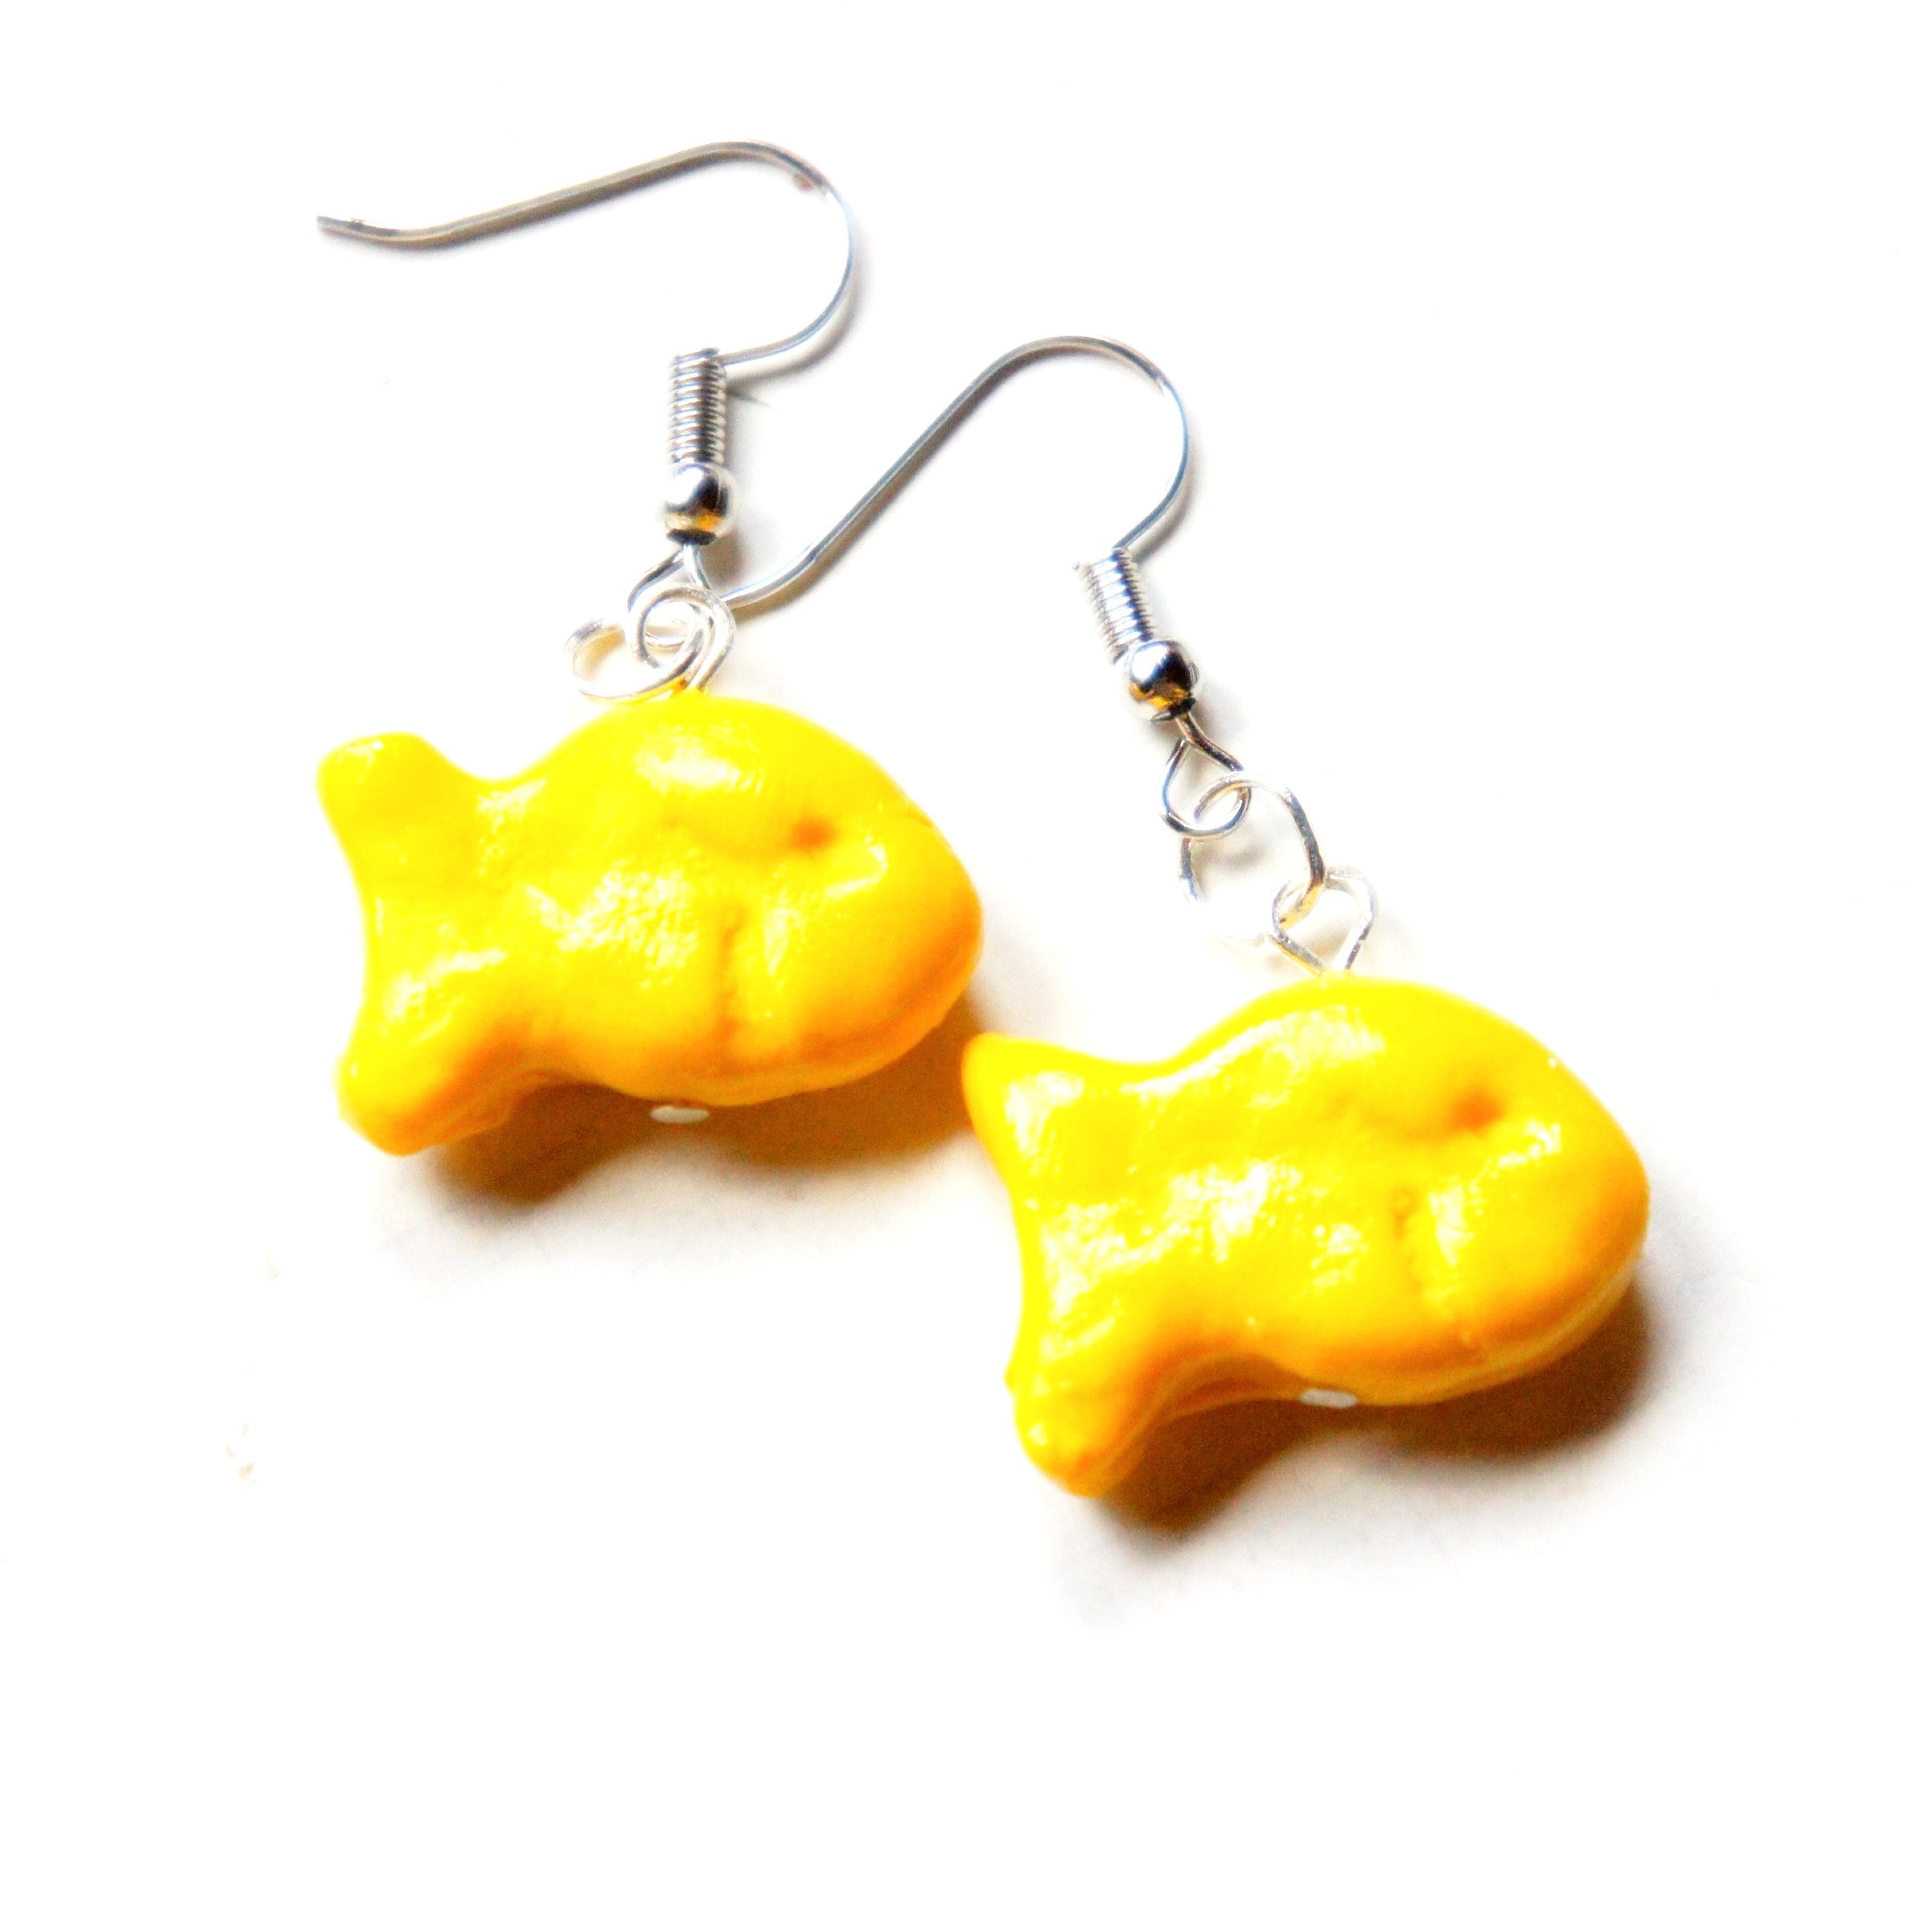 Goldfish Crackers Earrings - Jillicious charms and accessories